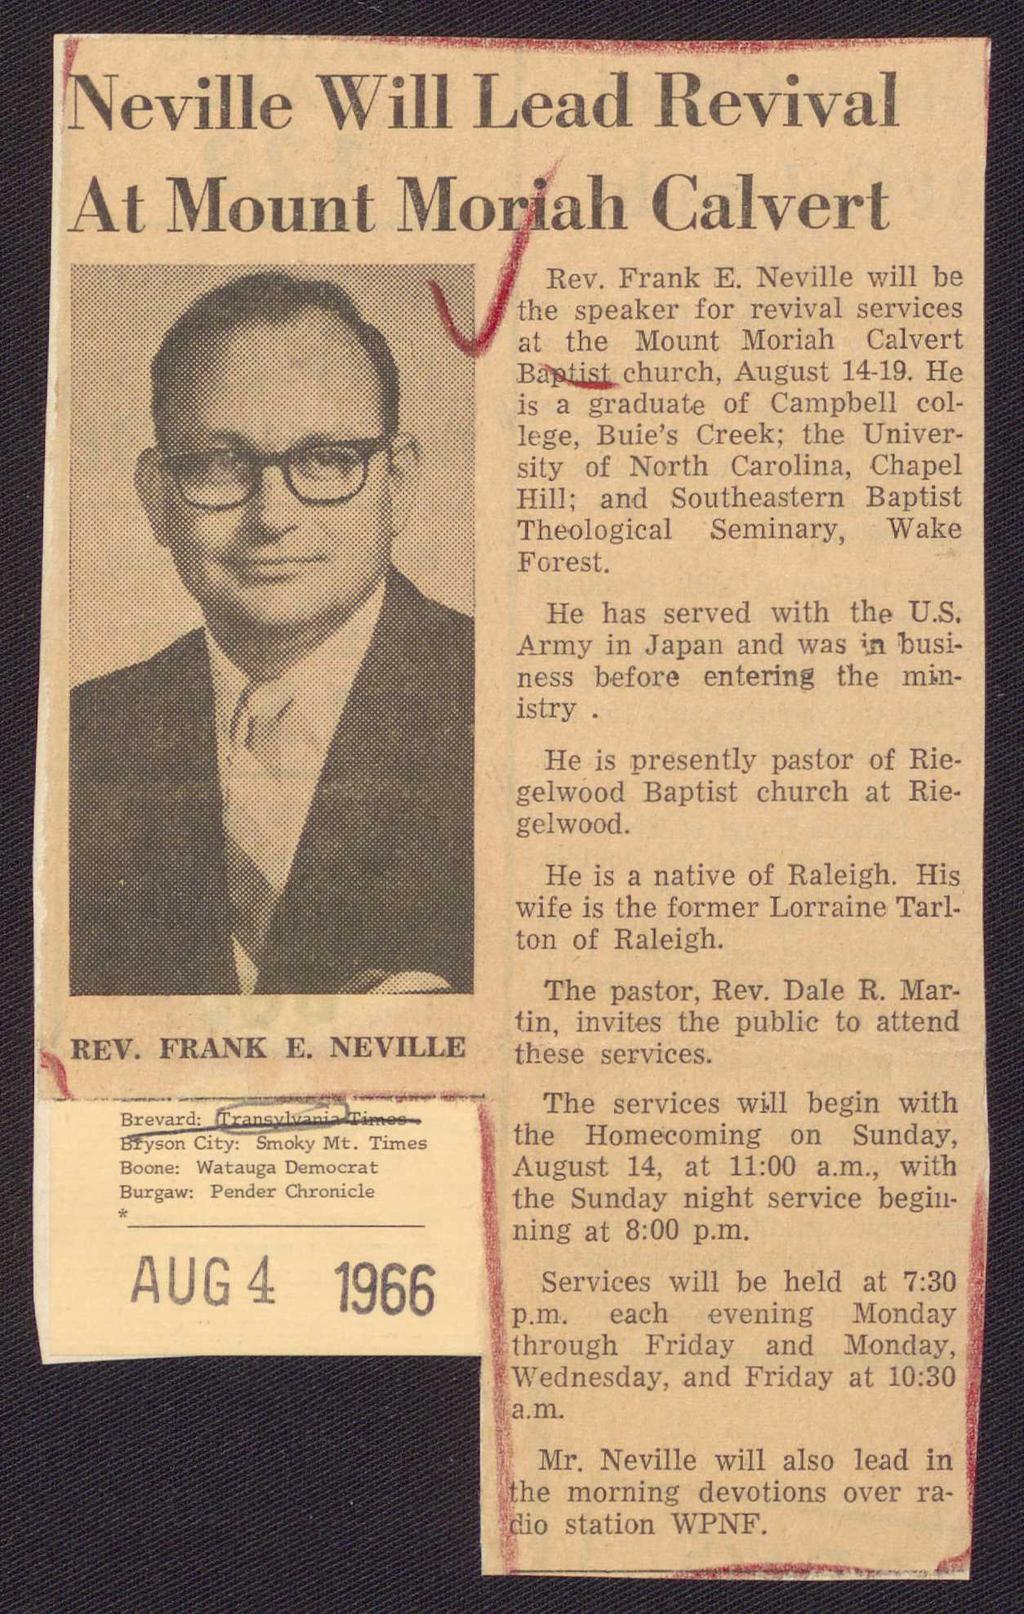 eville Will Lead Revival At Mount Mo Iah Calvert REV. FRANKE. NEVILLE ' Rev. Frank E. Neville will be the speaker for revival services, at the Mount Moriah Calvert B~church, August 14-19.